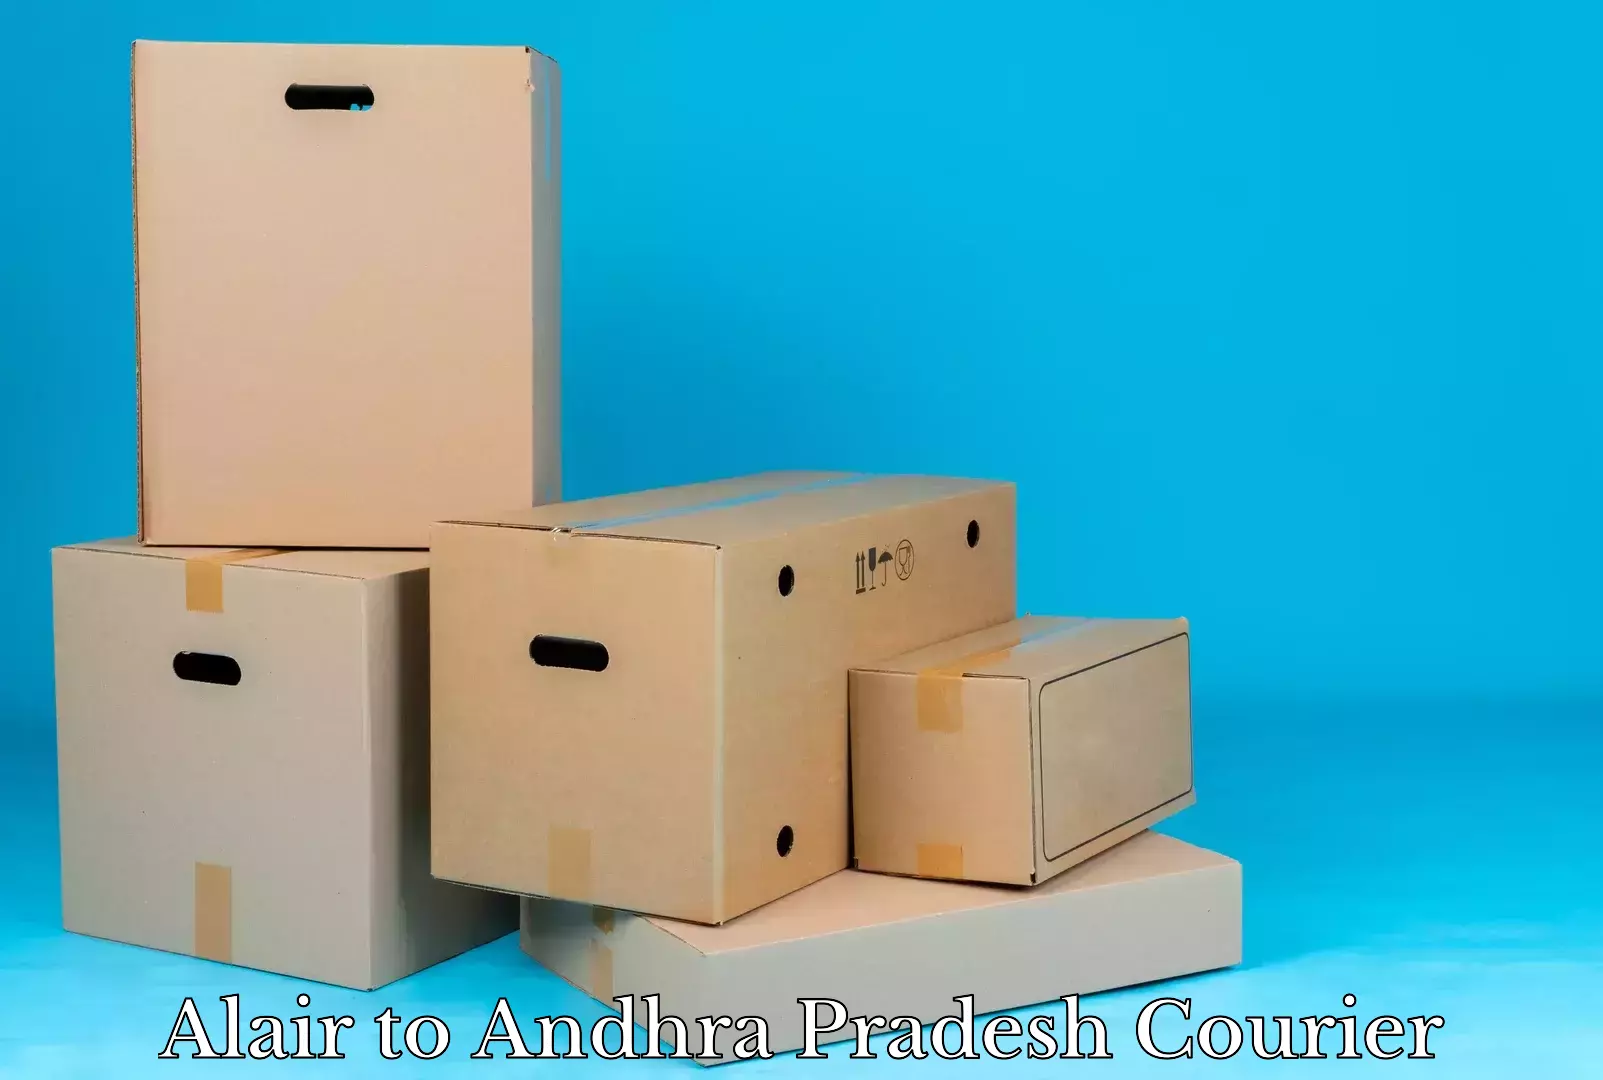 Specialized moving company Alair to Visakhapatnam Port